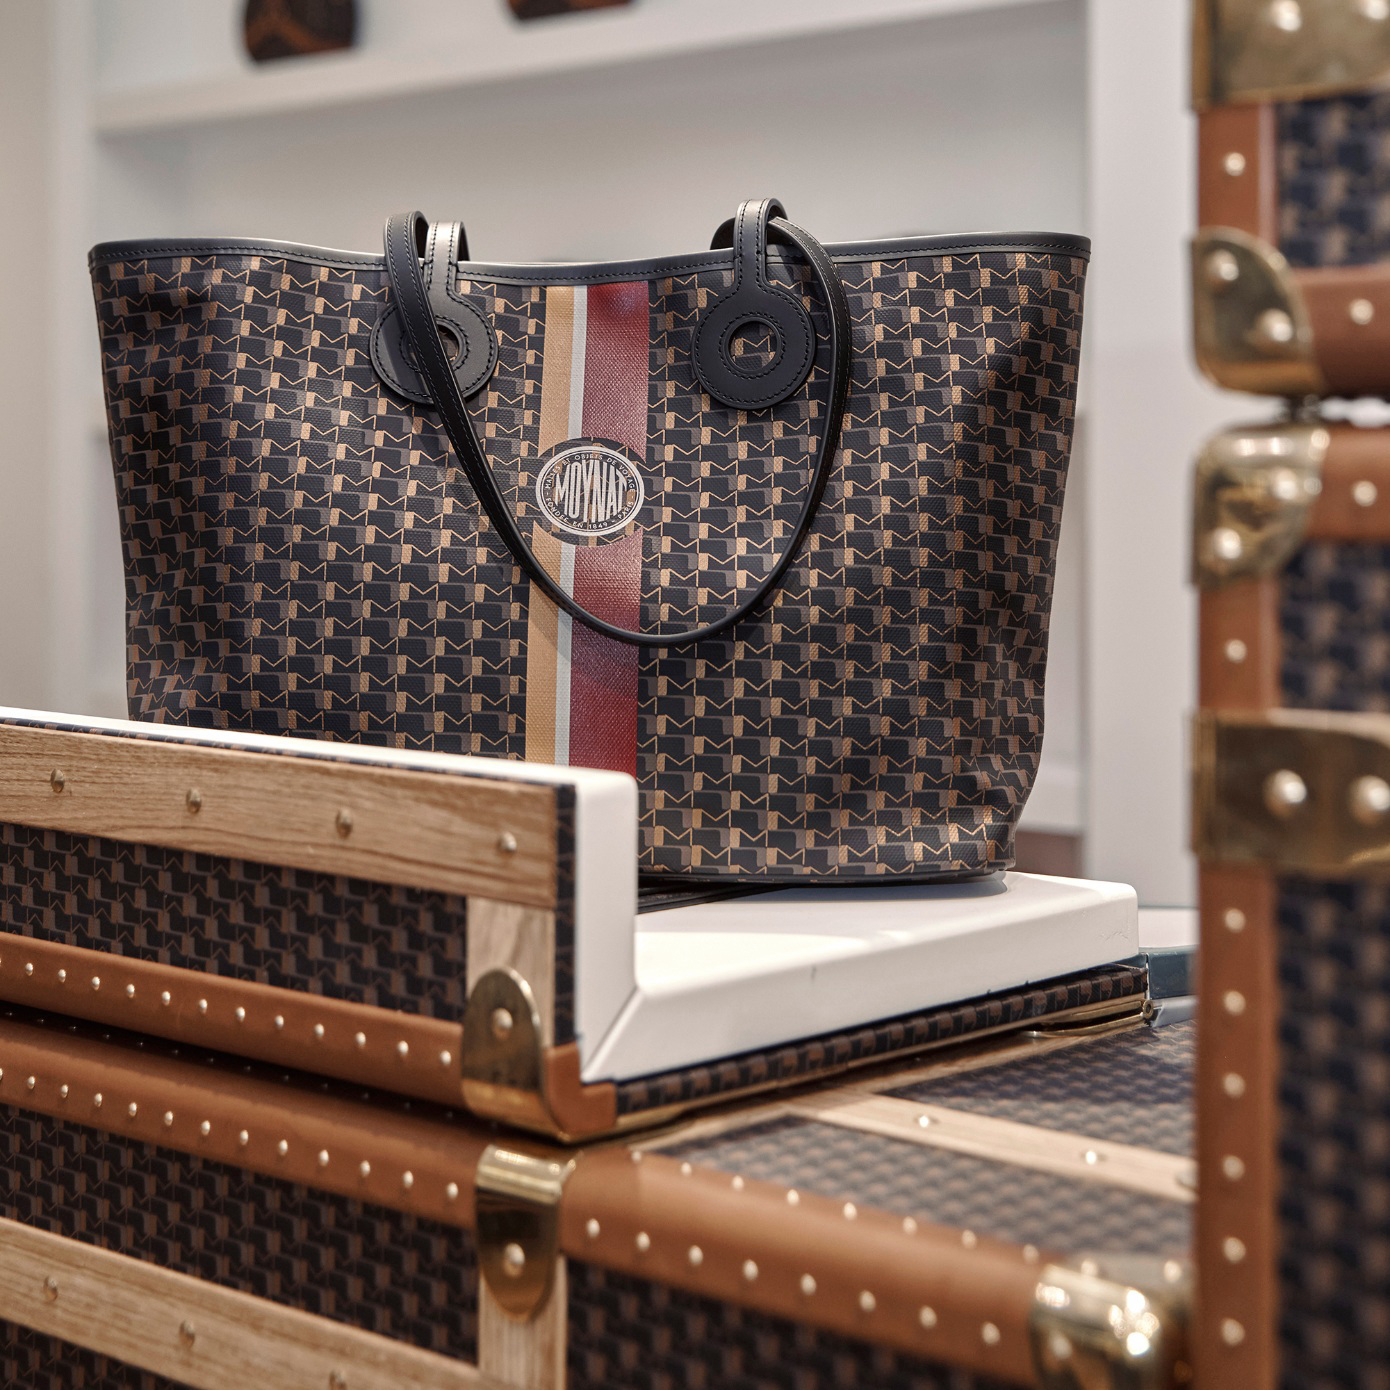 Moynat is Making the Personal Global